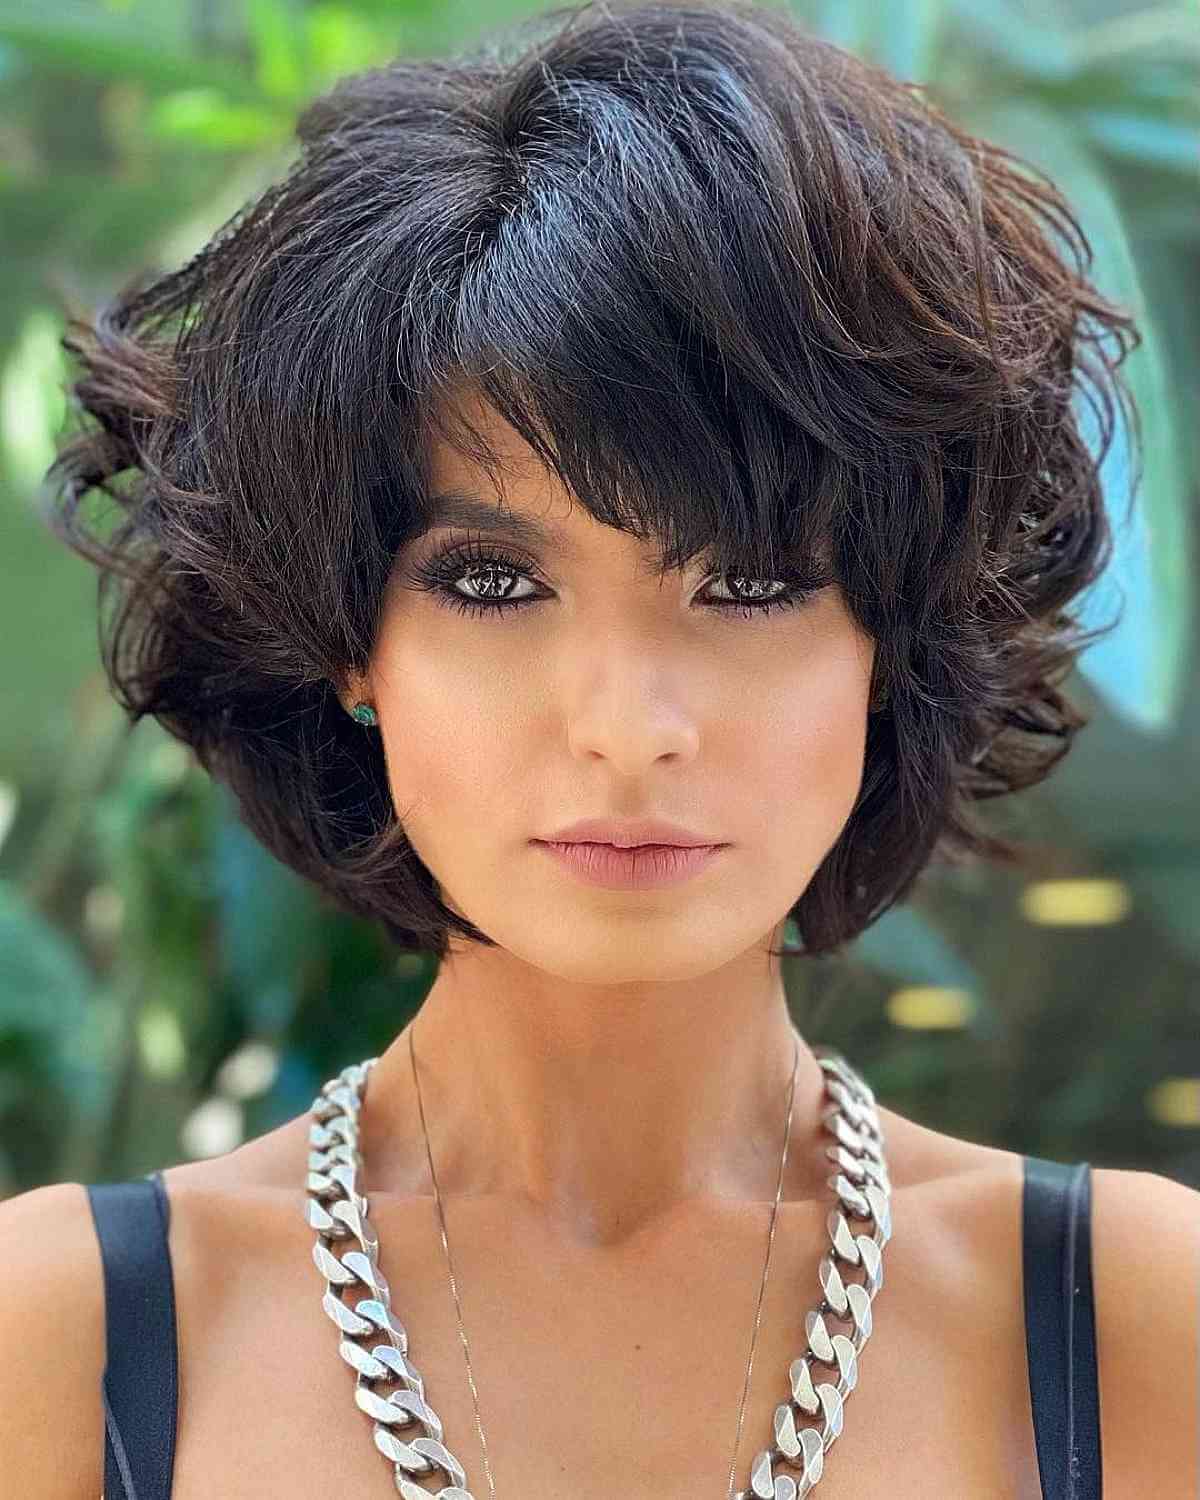 Jaw-Length Layered Cut with Bangs for Very Thick Fluffy Hair